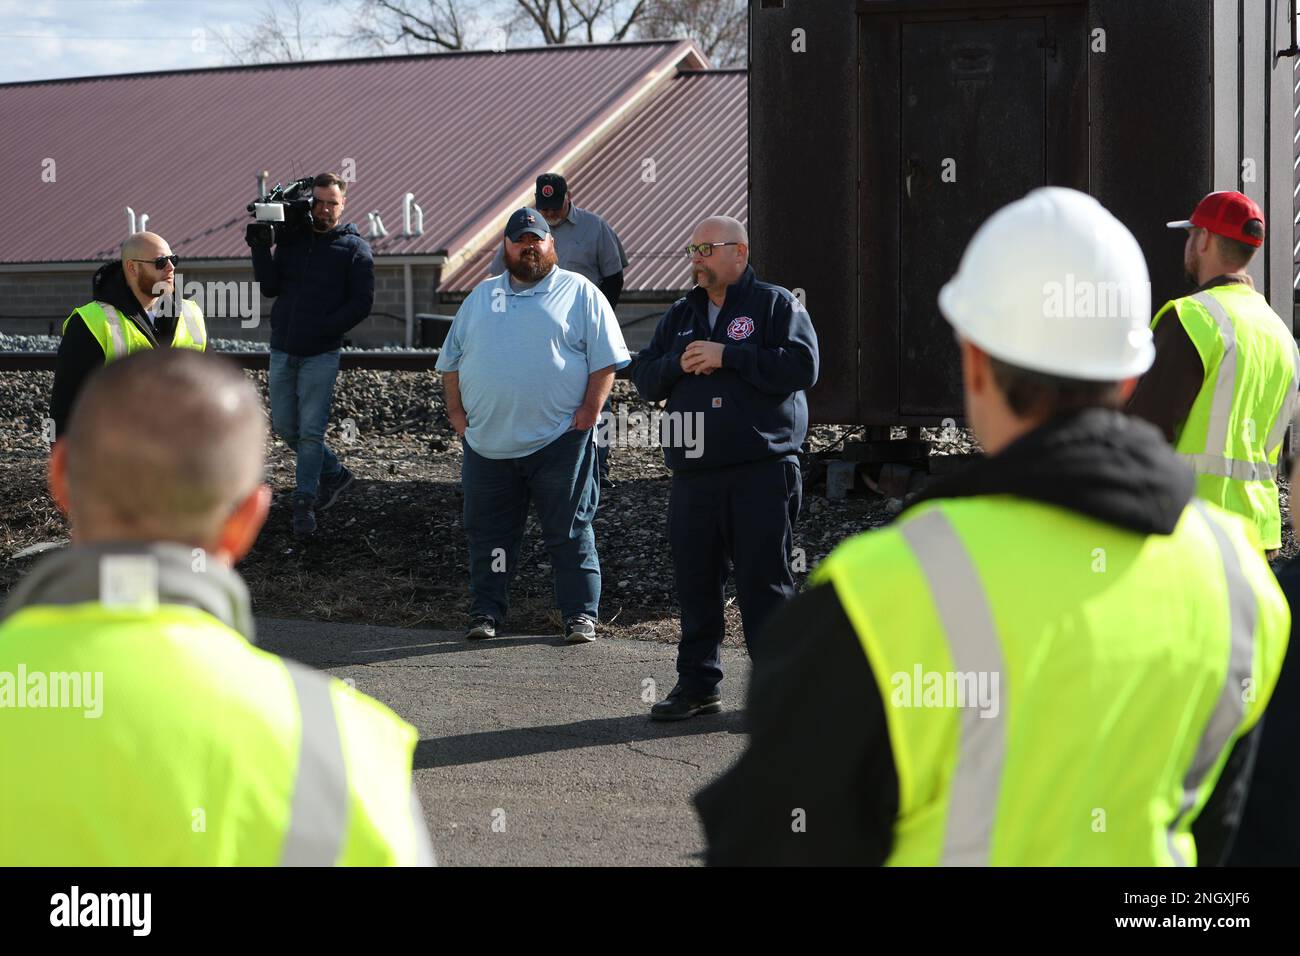 East Palestine, OH, USA. 19th Feb, 2023. Mayor of East Palestine, Ohio, Trent Conaway and Fire Department Chief Keith Drabick gather with members of the Ohio EPA and members of FEMA more than 2 weeks after a train derailment containing toxic chemicals were released into the air, soil and surface water on February 19, 2023 in East Palestine, Ohio. Credit: Mpi34/Media Punch/Alamy Live News Stock Photo